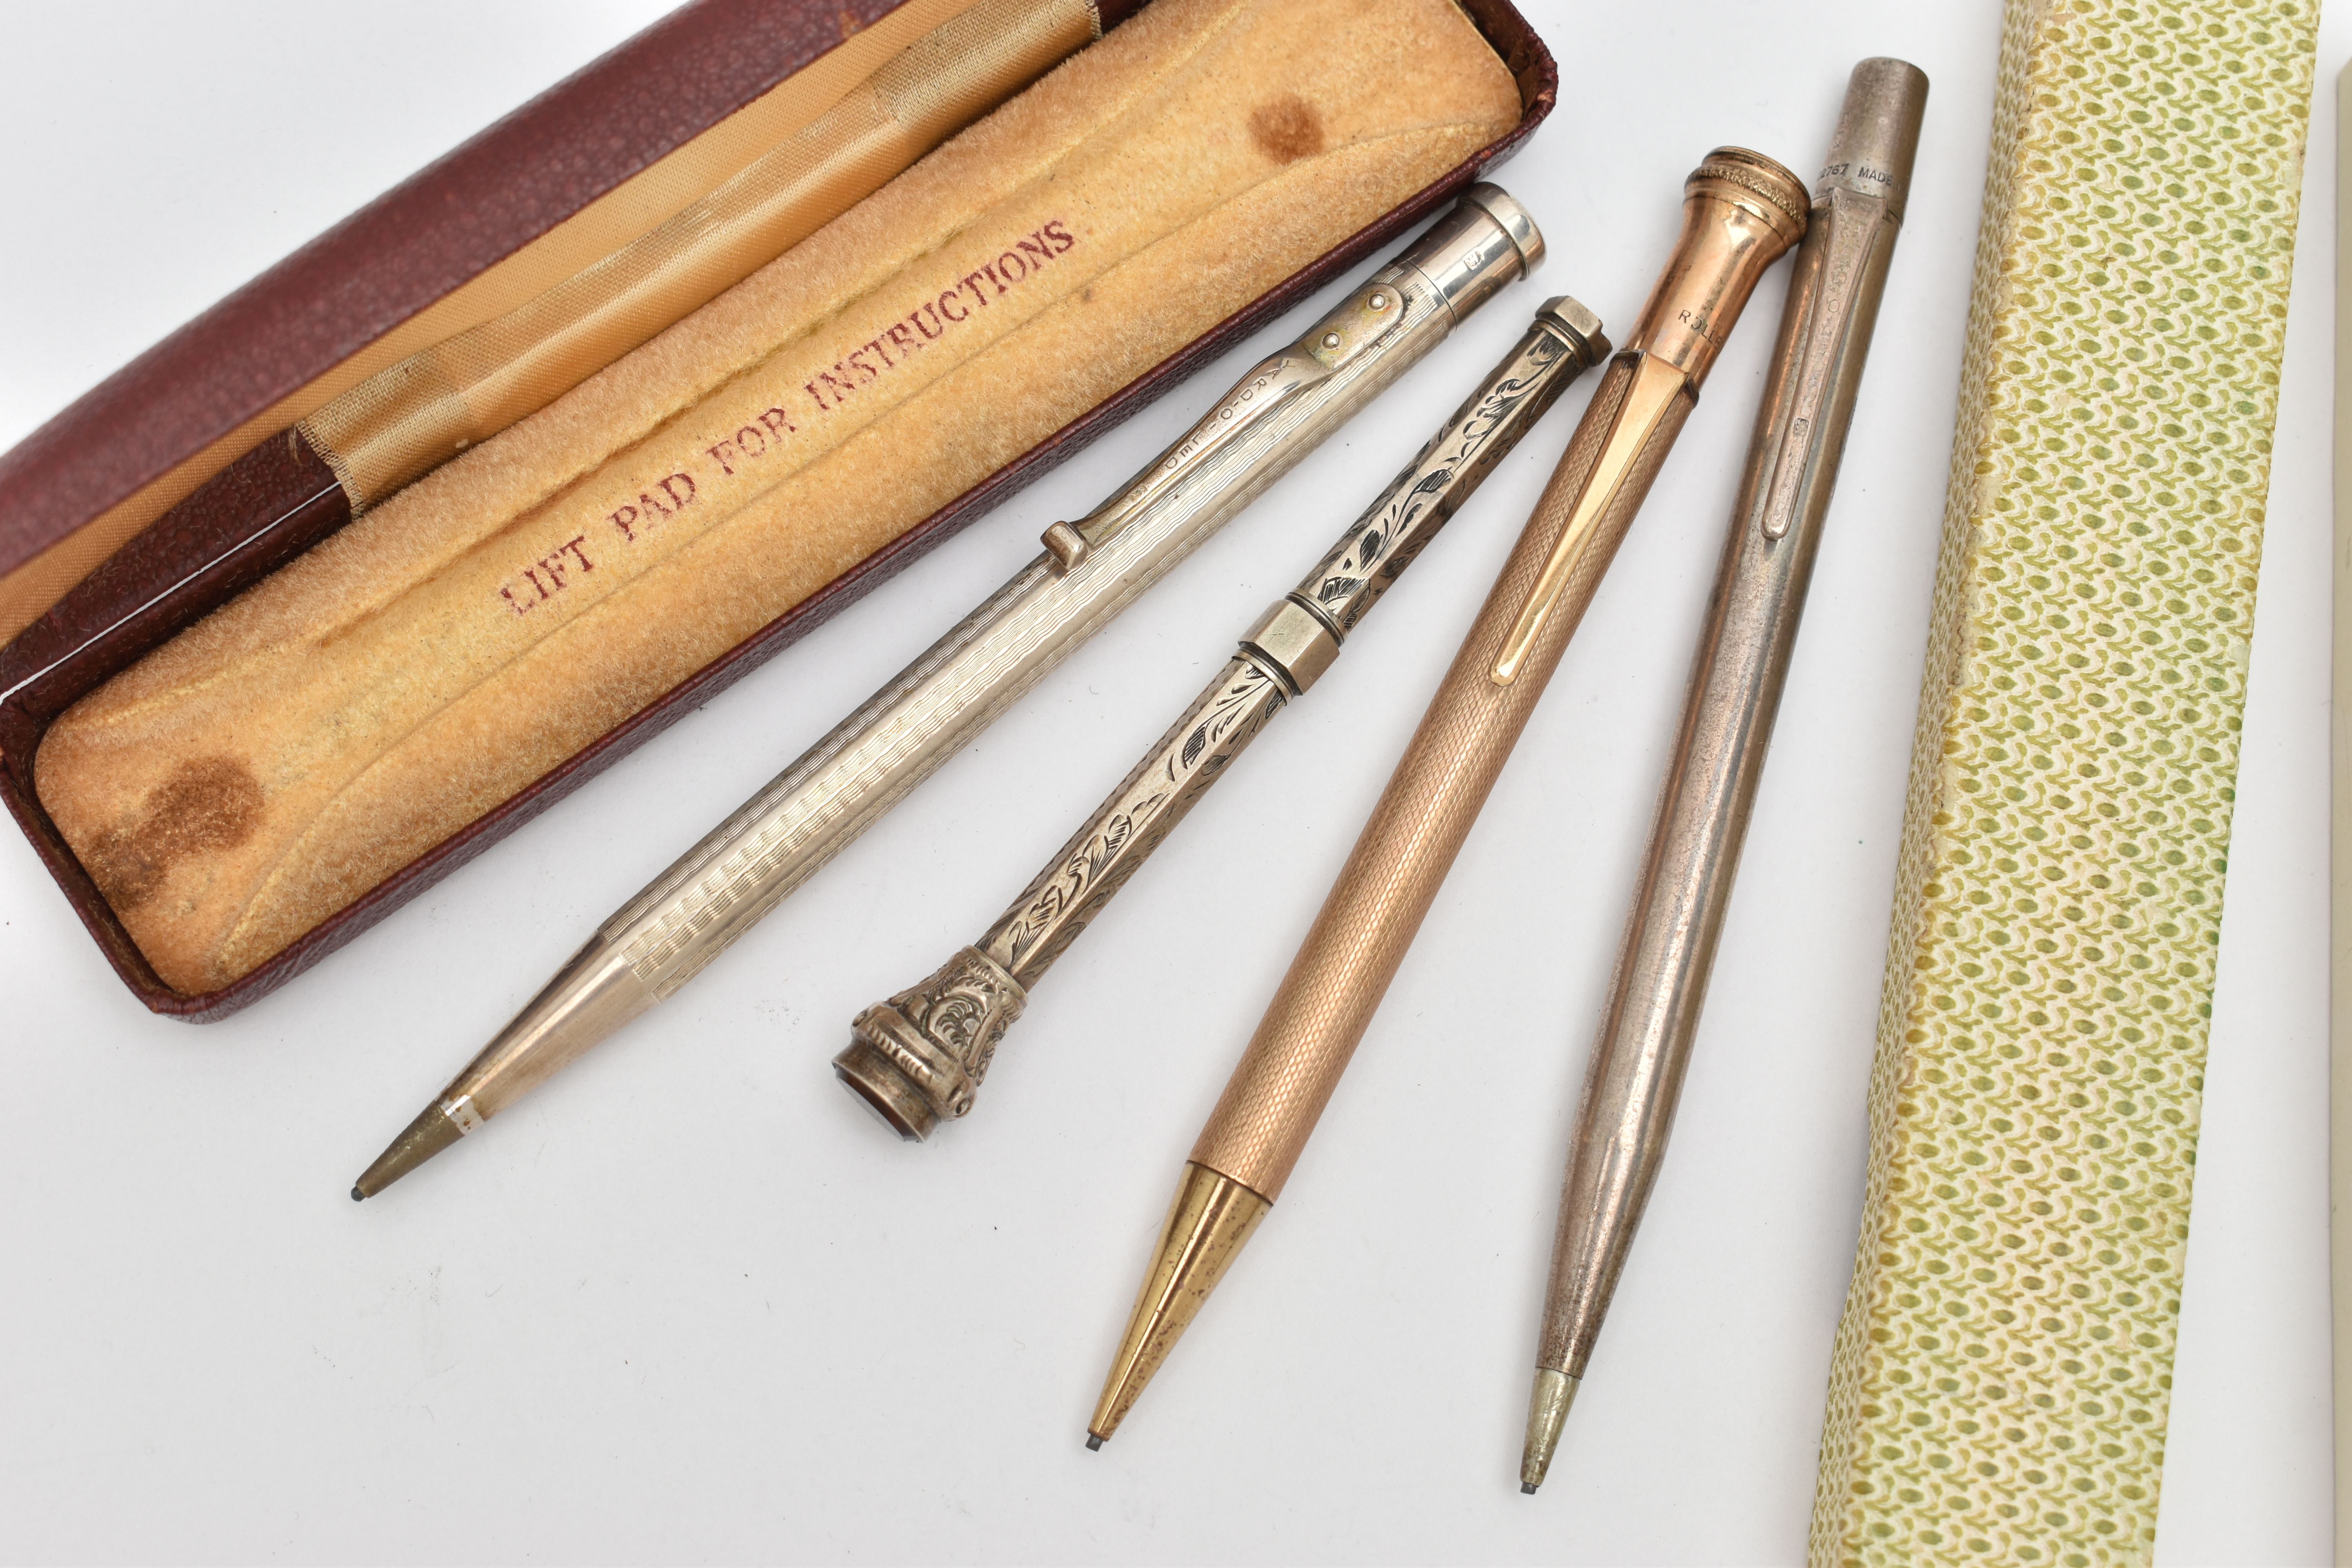 FOUR PENCILS, the first a rolled gold propelling pencil, a boxed 'Yard o' Led' silver pencil,